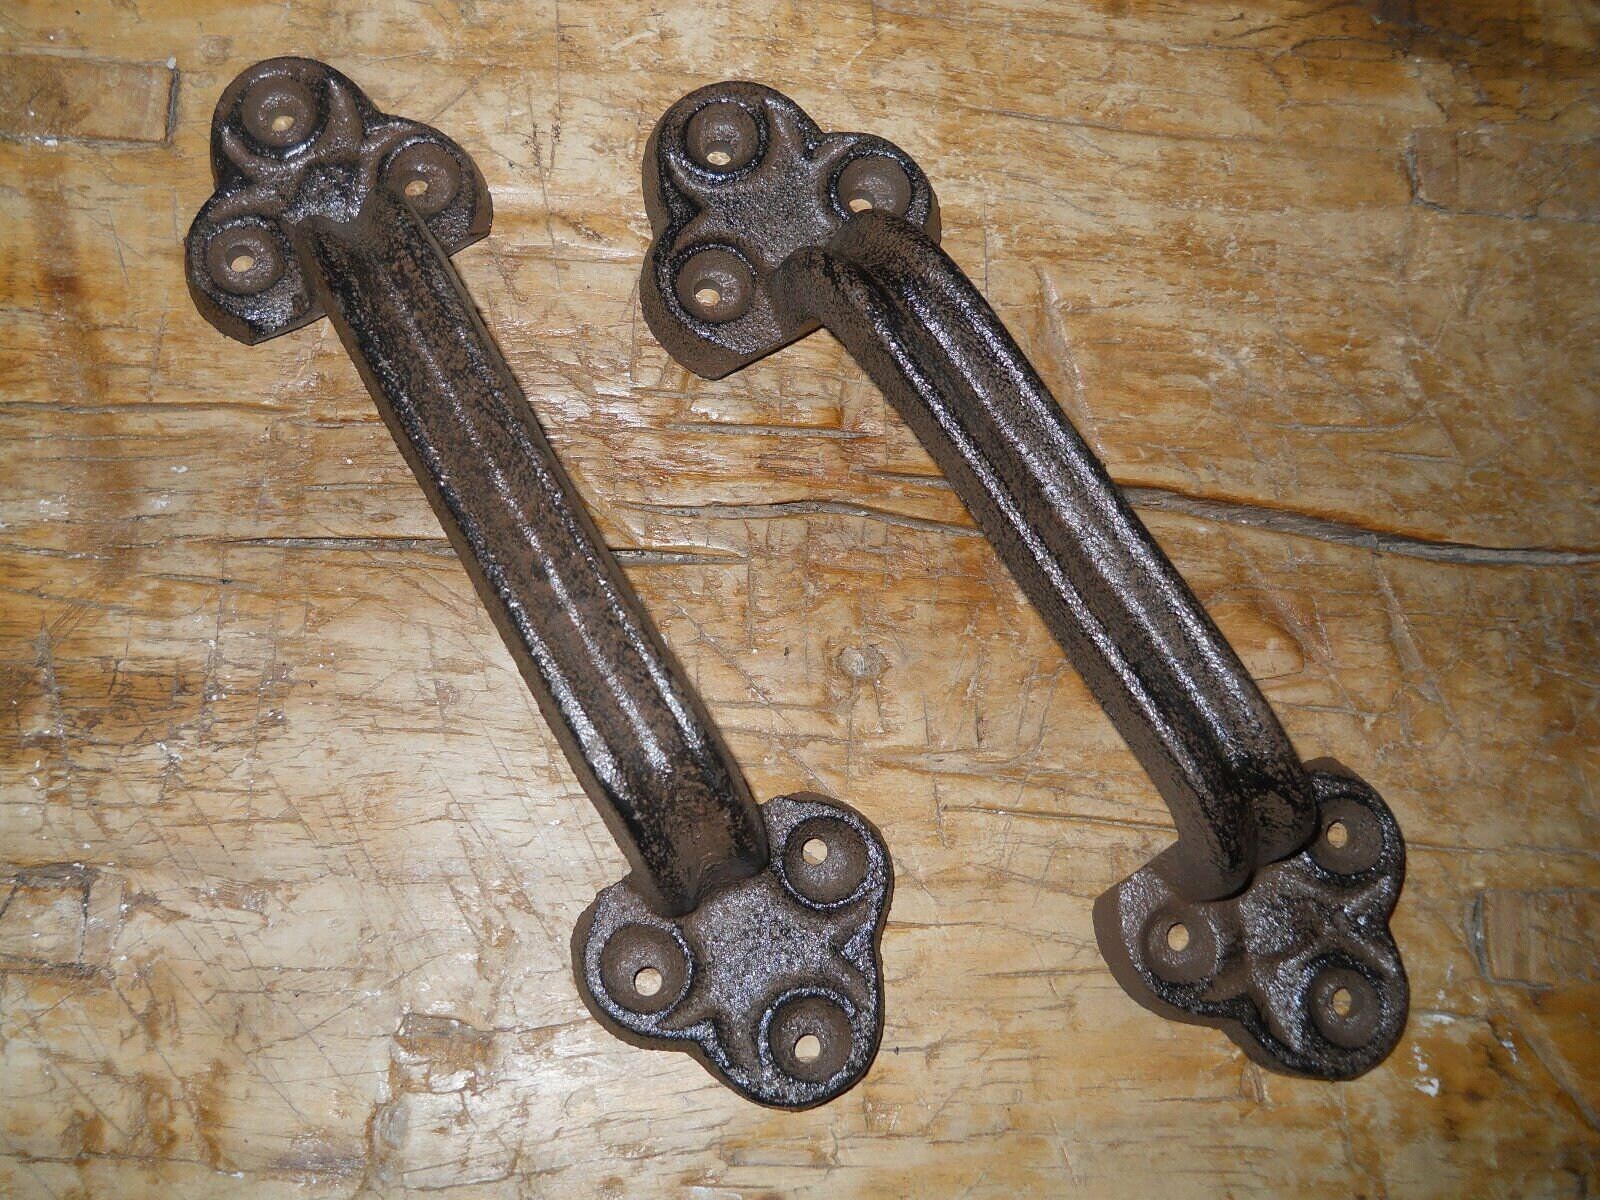 4 HUGE Cast Iron Antique Style RUSTIC Barn Handle Gate Pull Shed Door Handles 